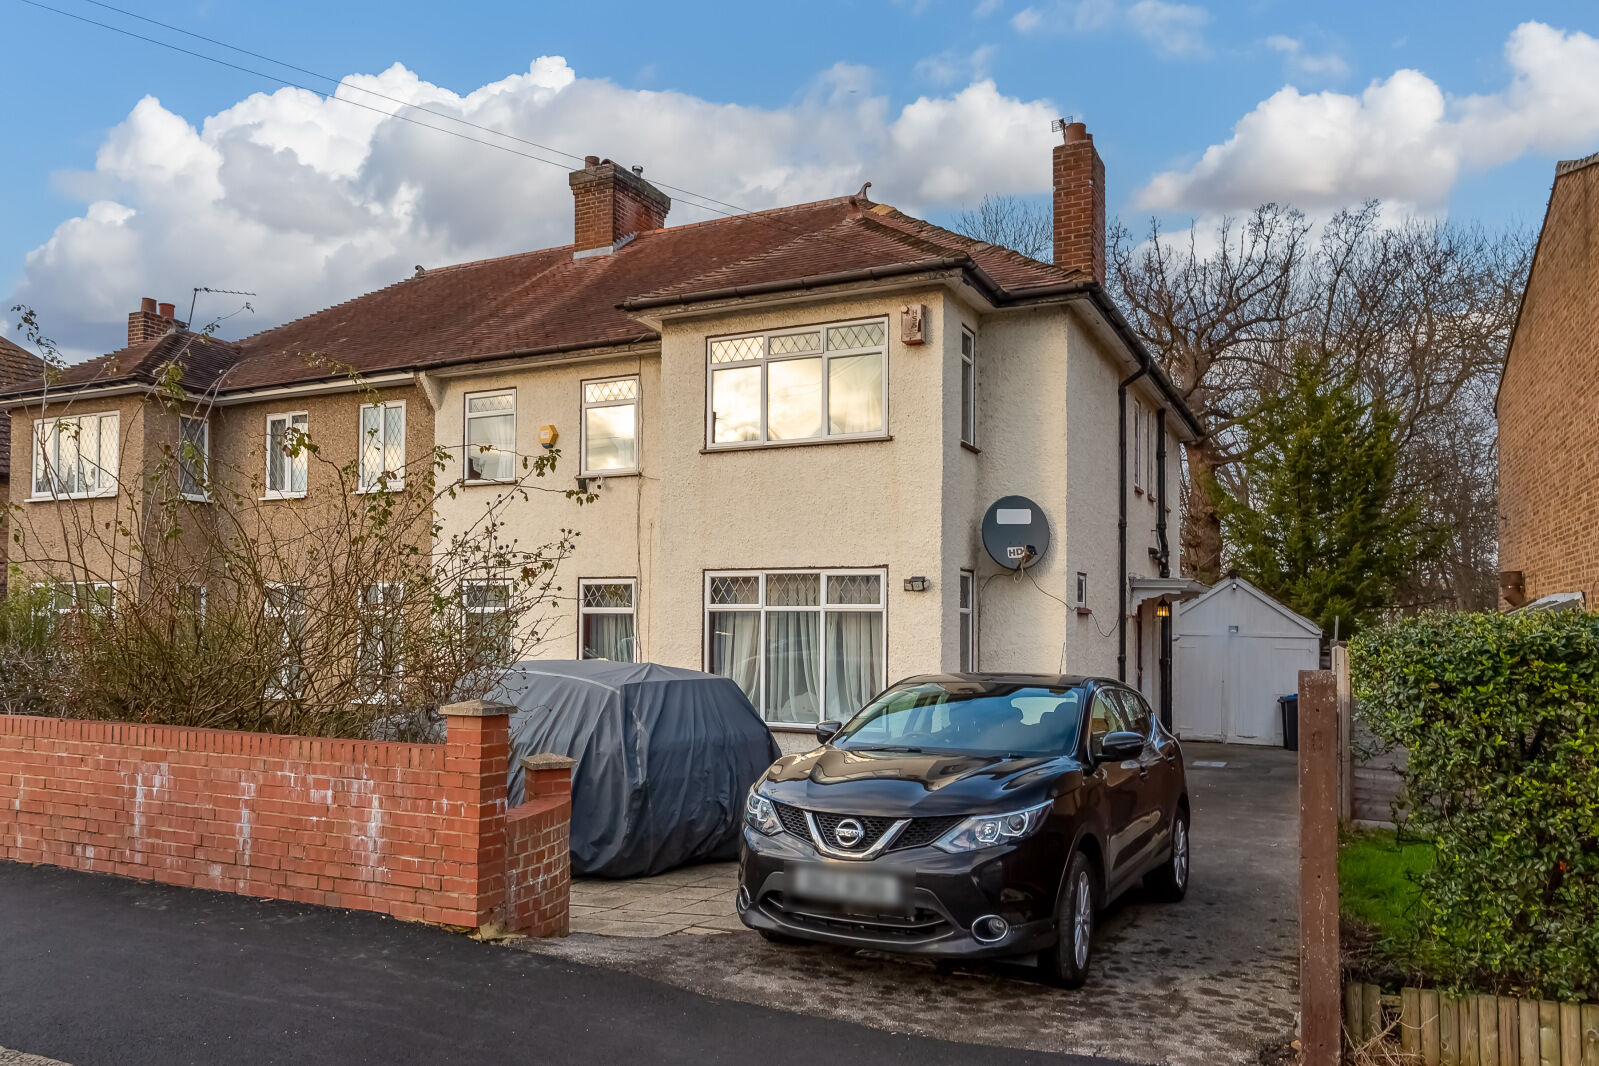 4 bedroom semi detached house for sale Wandle Road, Morden, SM4, main image